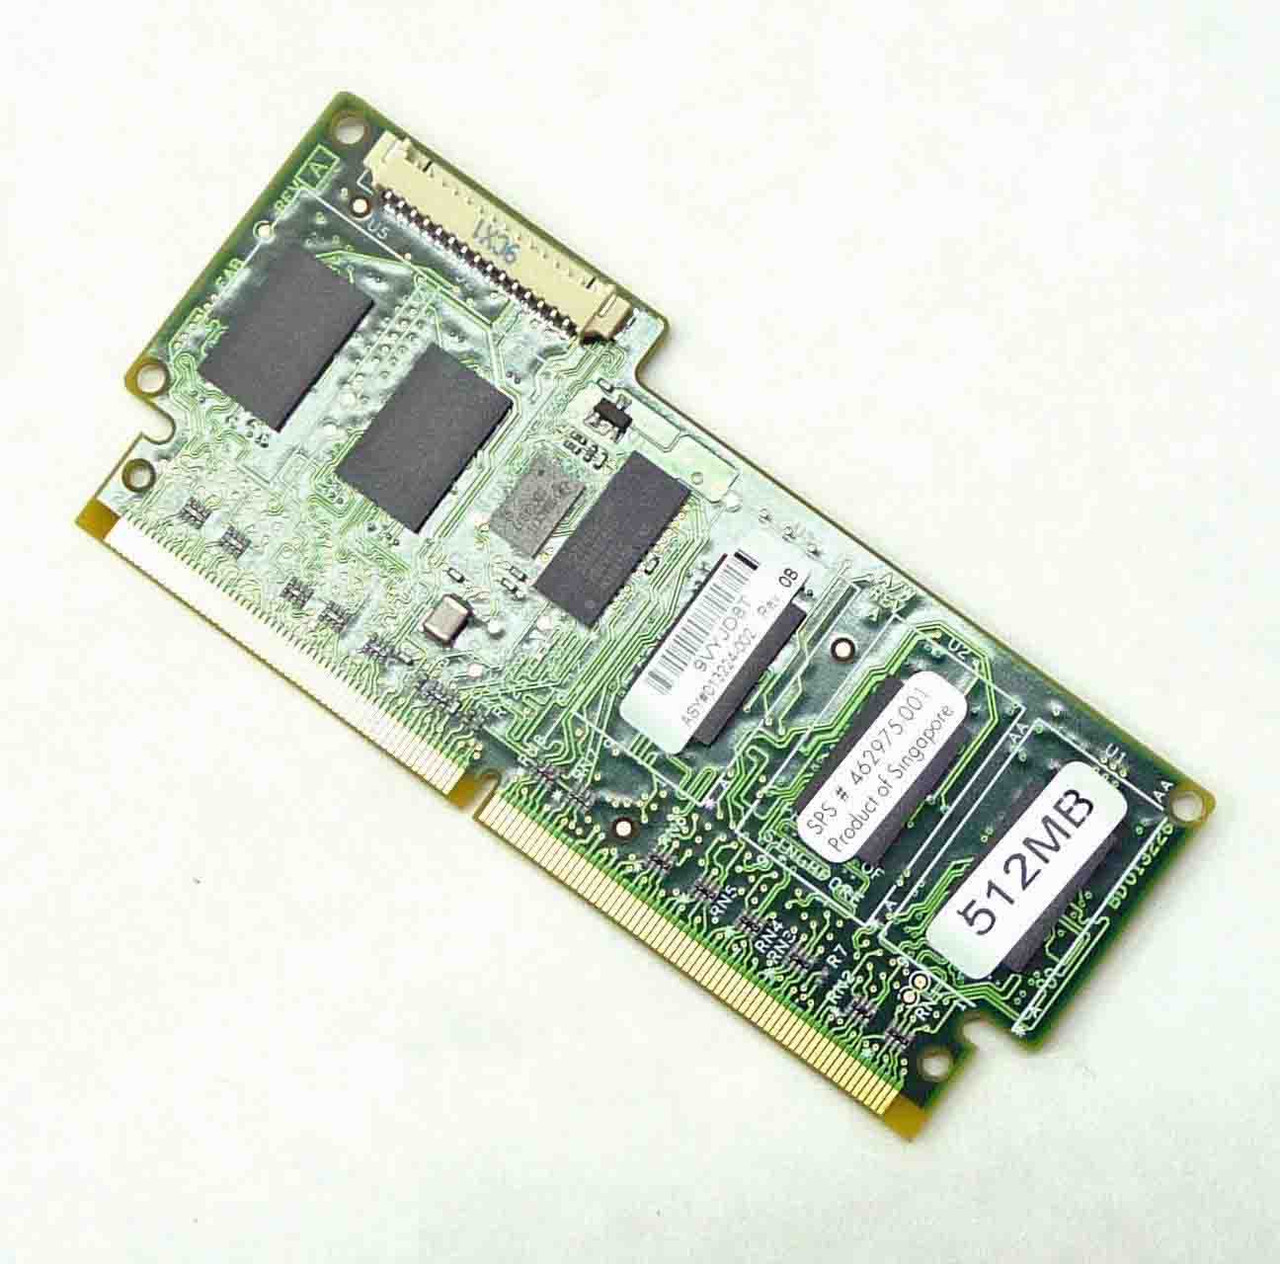 HPE 462975-001 512MB Smart Array BBWC Storage Controller Memory, Wholesale  462975-001, Price 462975-001